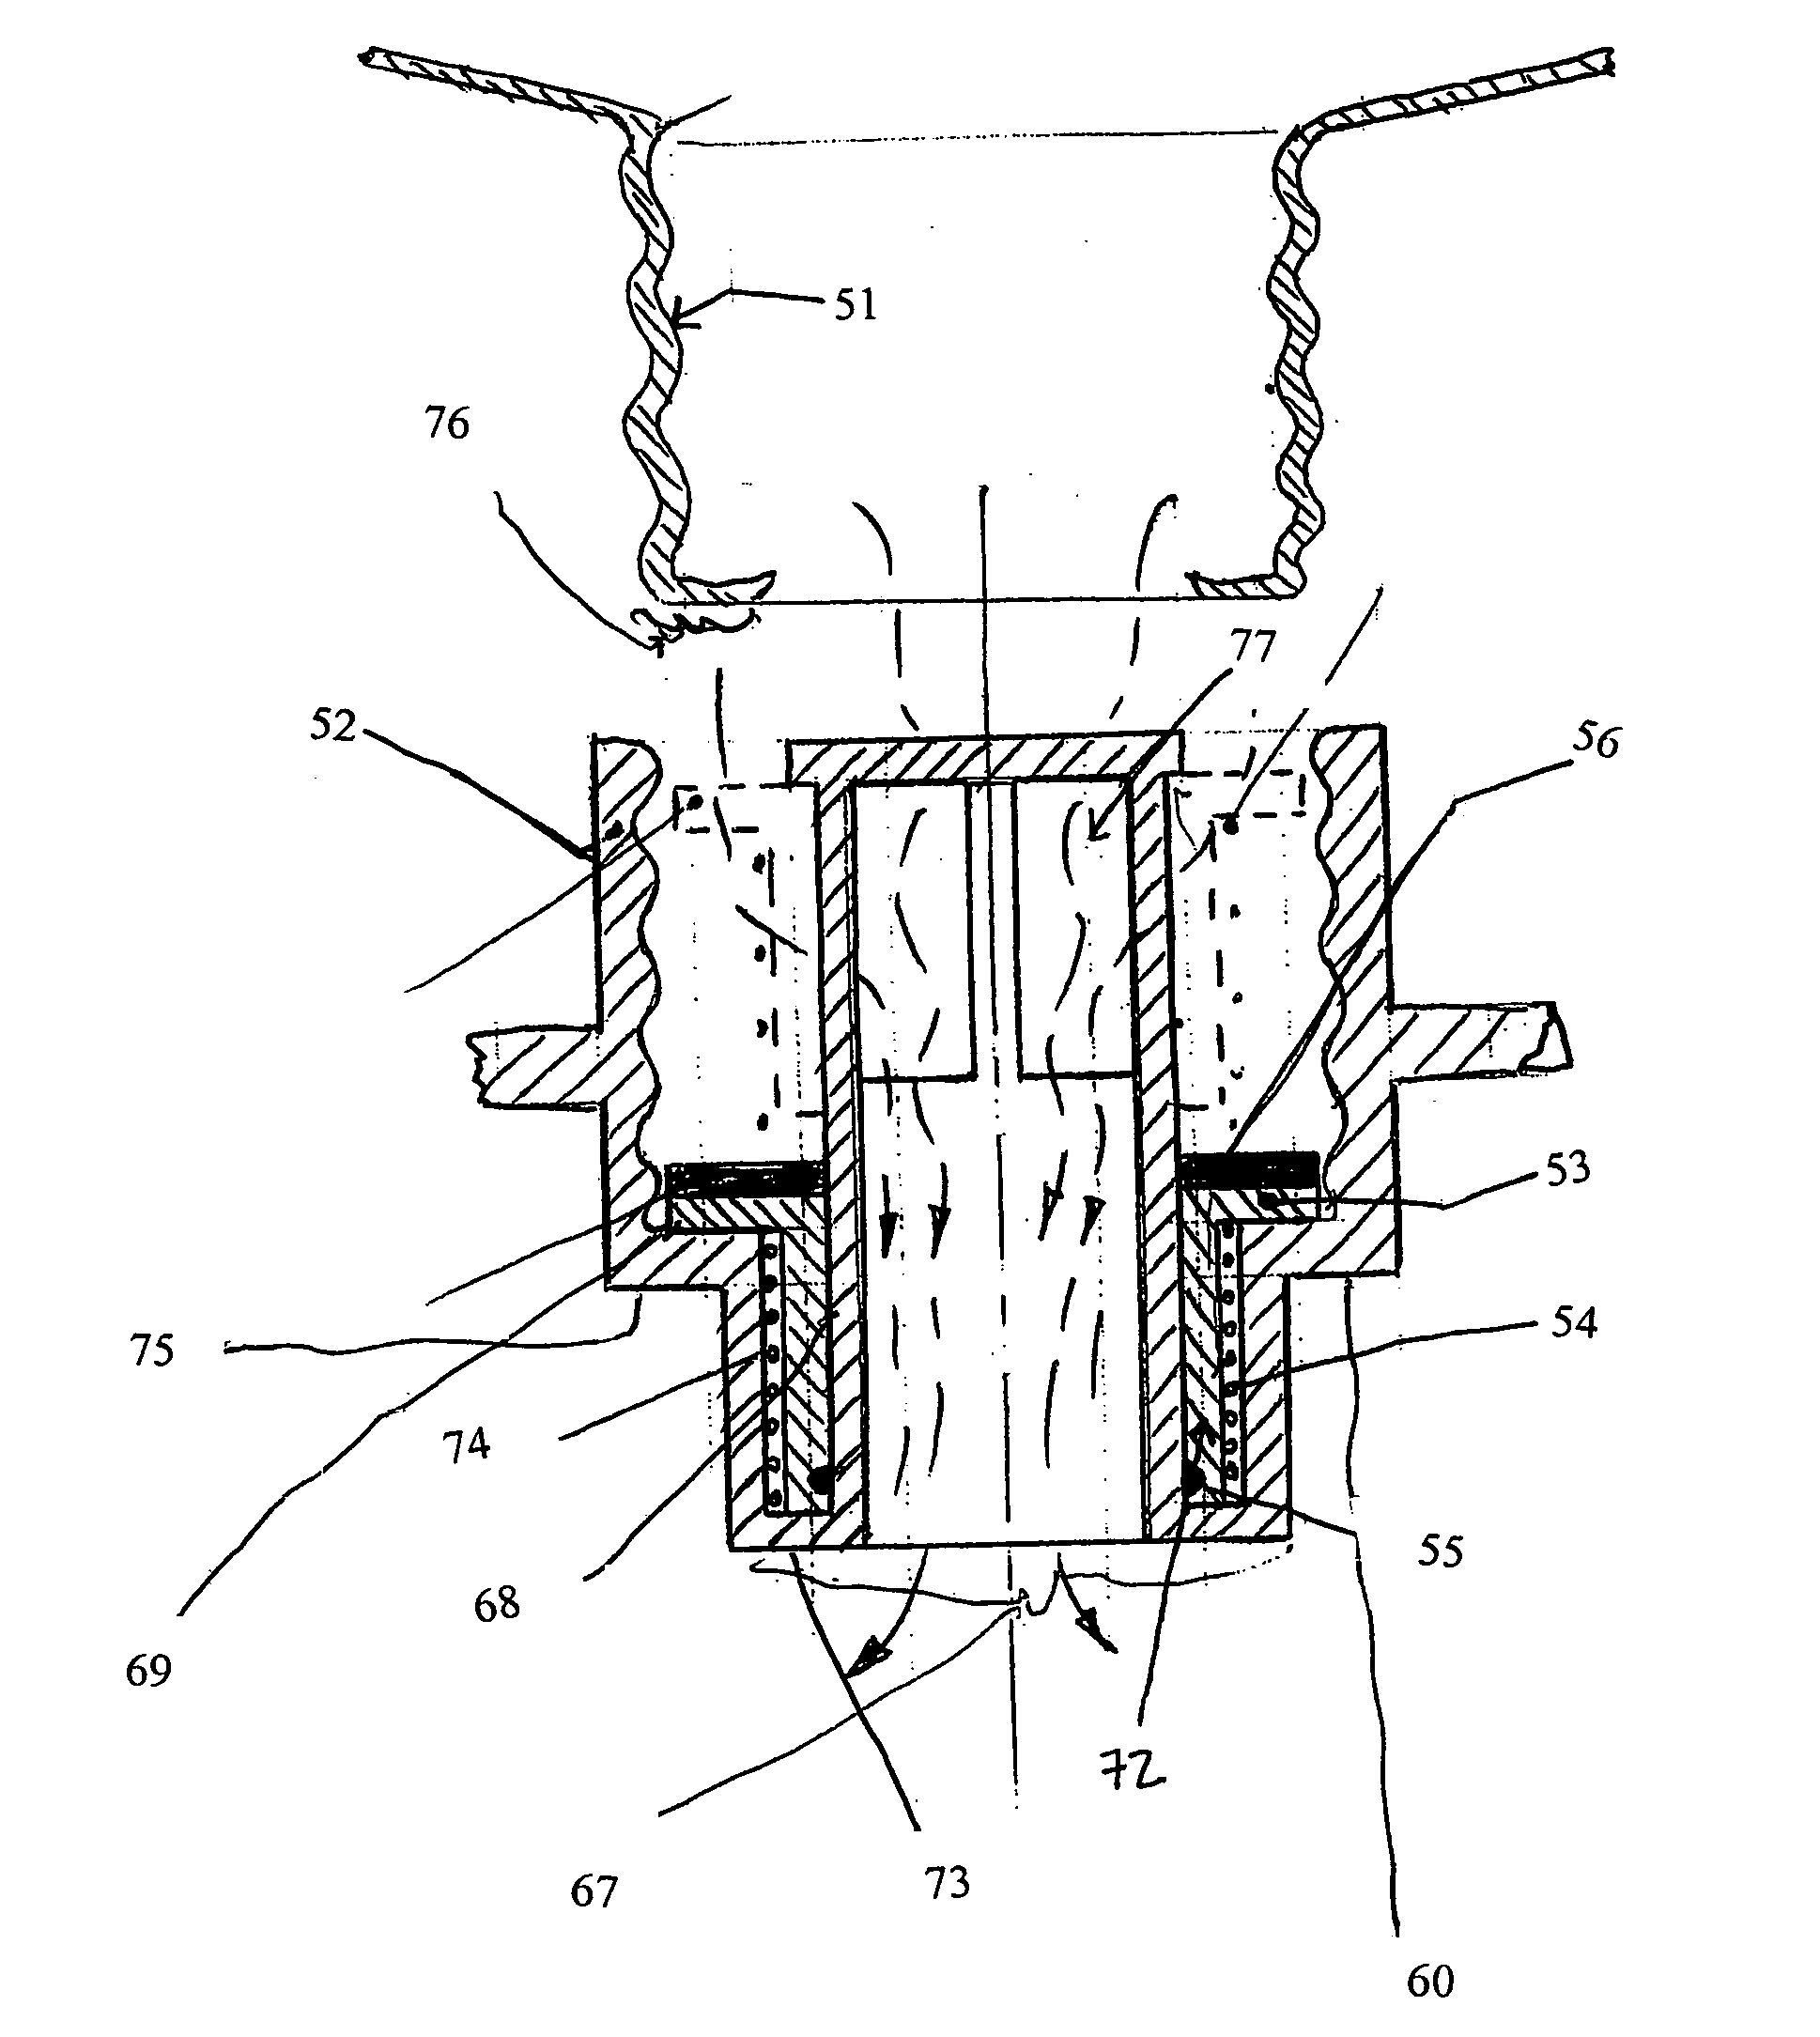 Self-sealing protection filter port